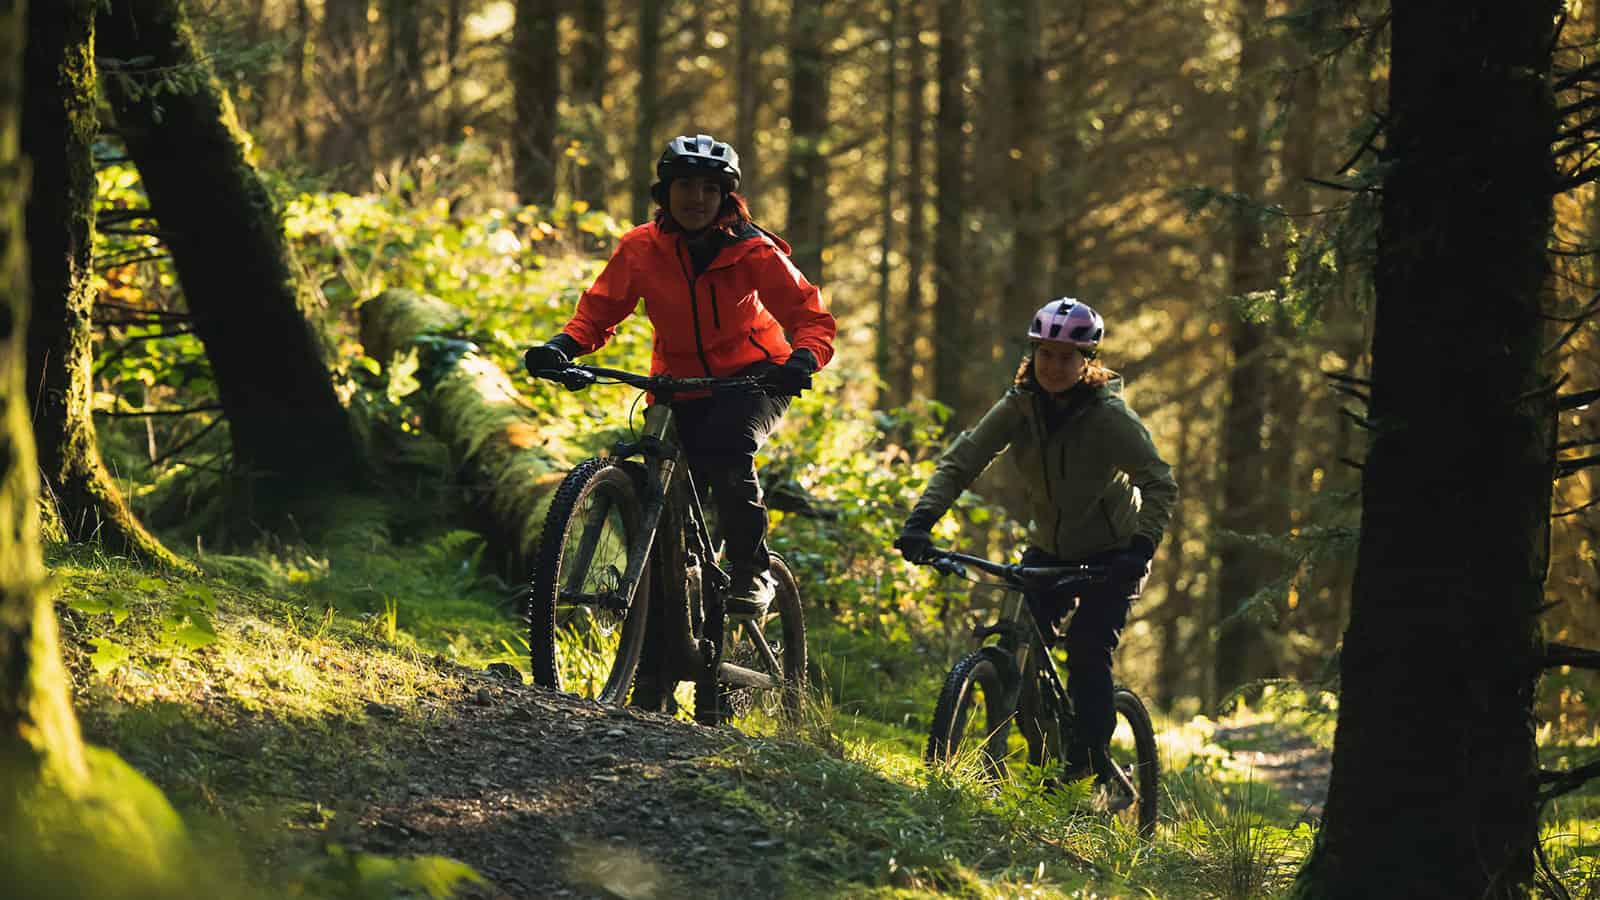 The 5 best electric mountain bikes two women riding Canyon bikes in a dense forest